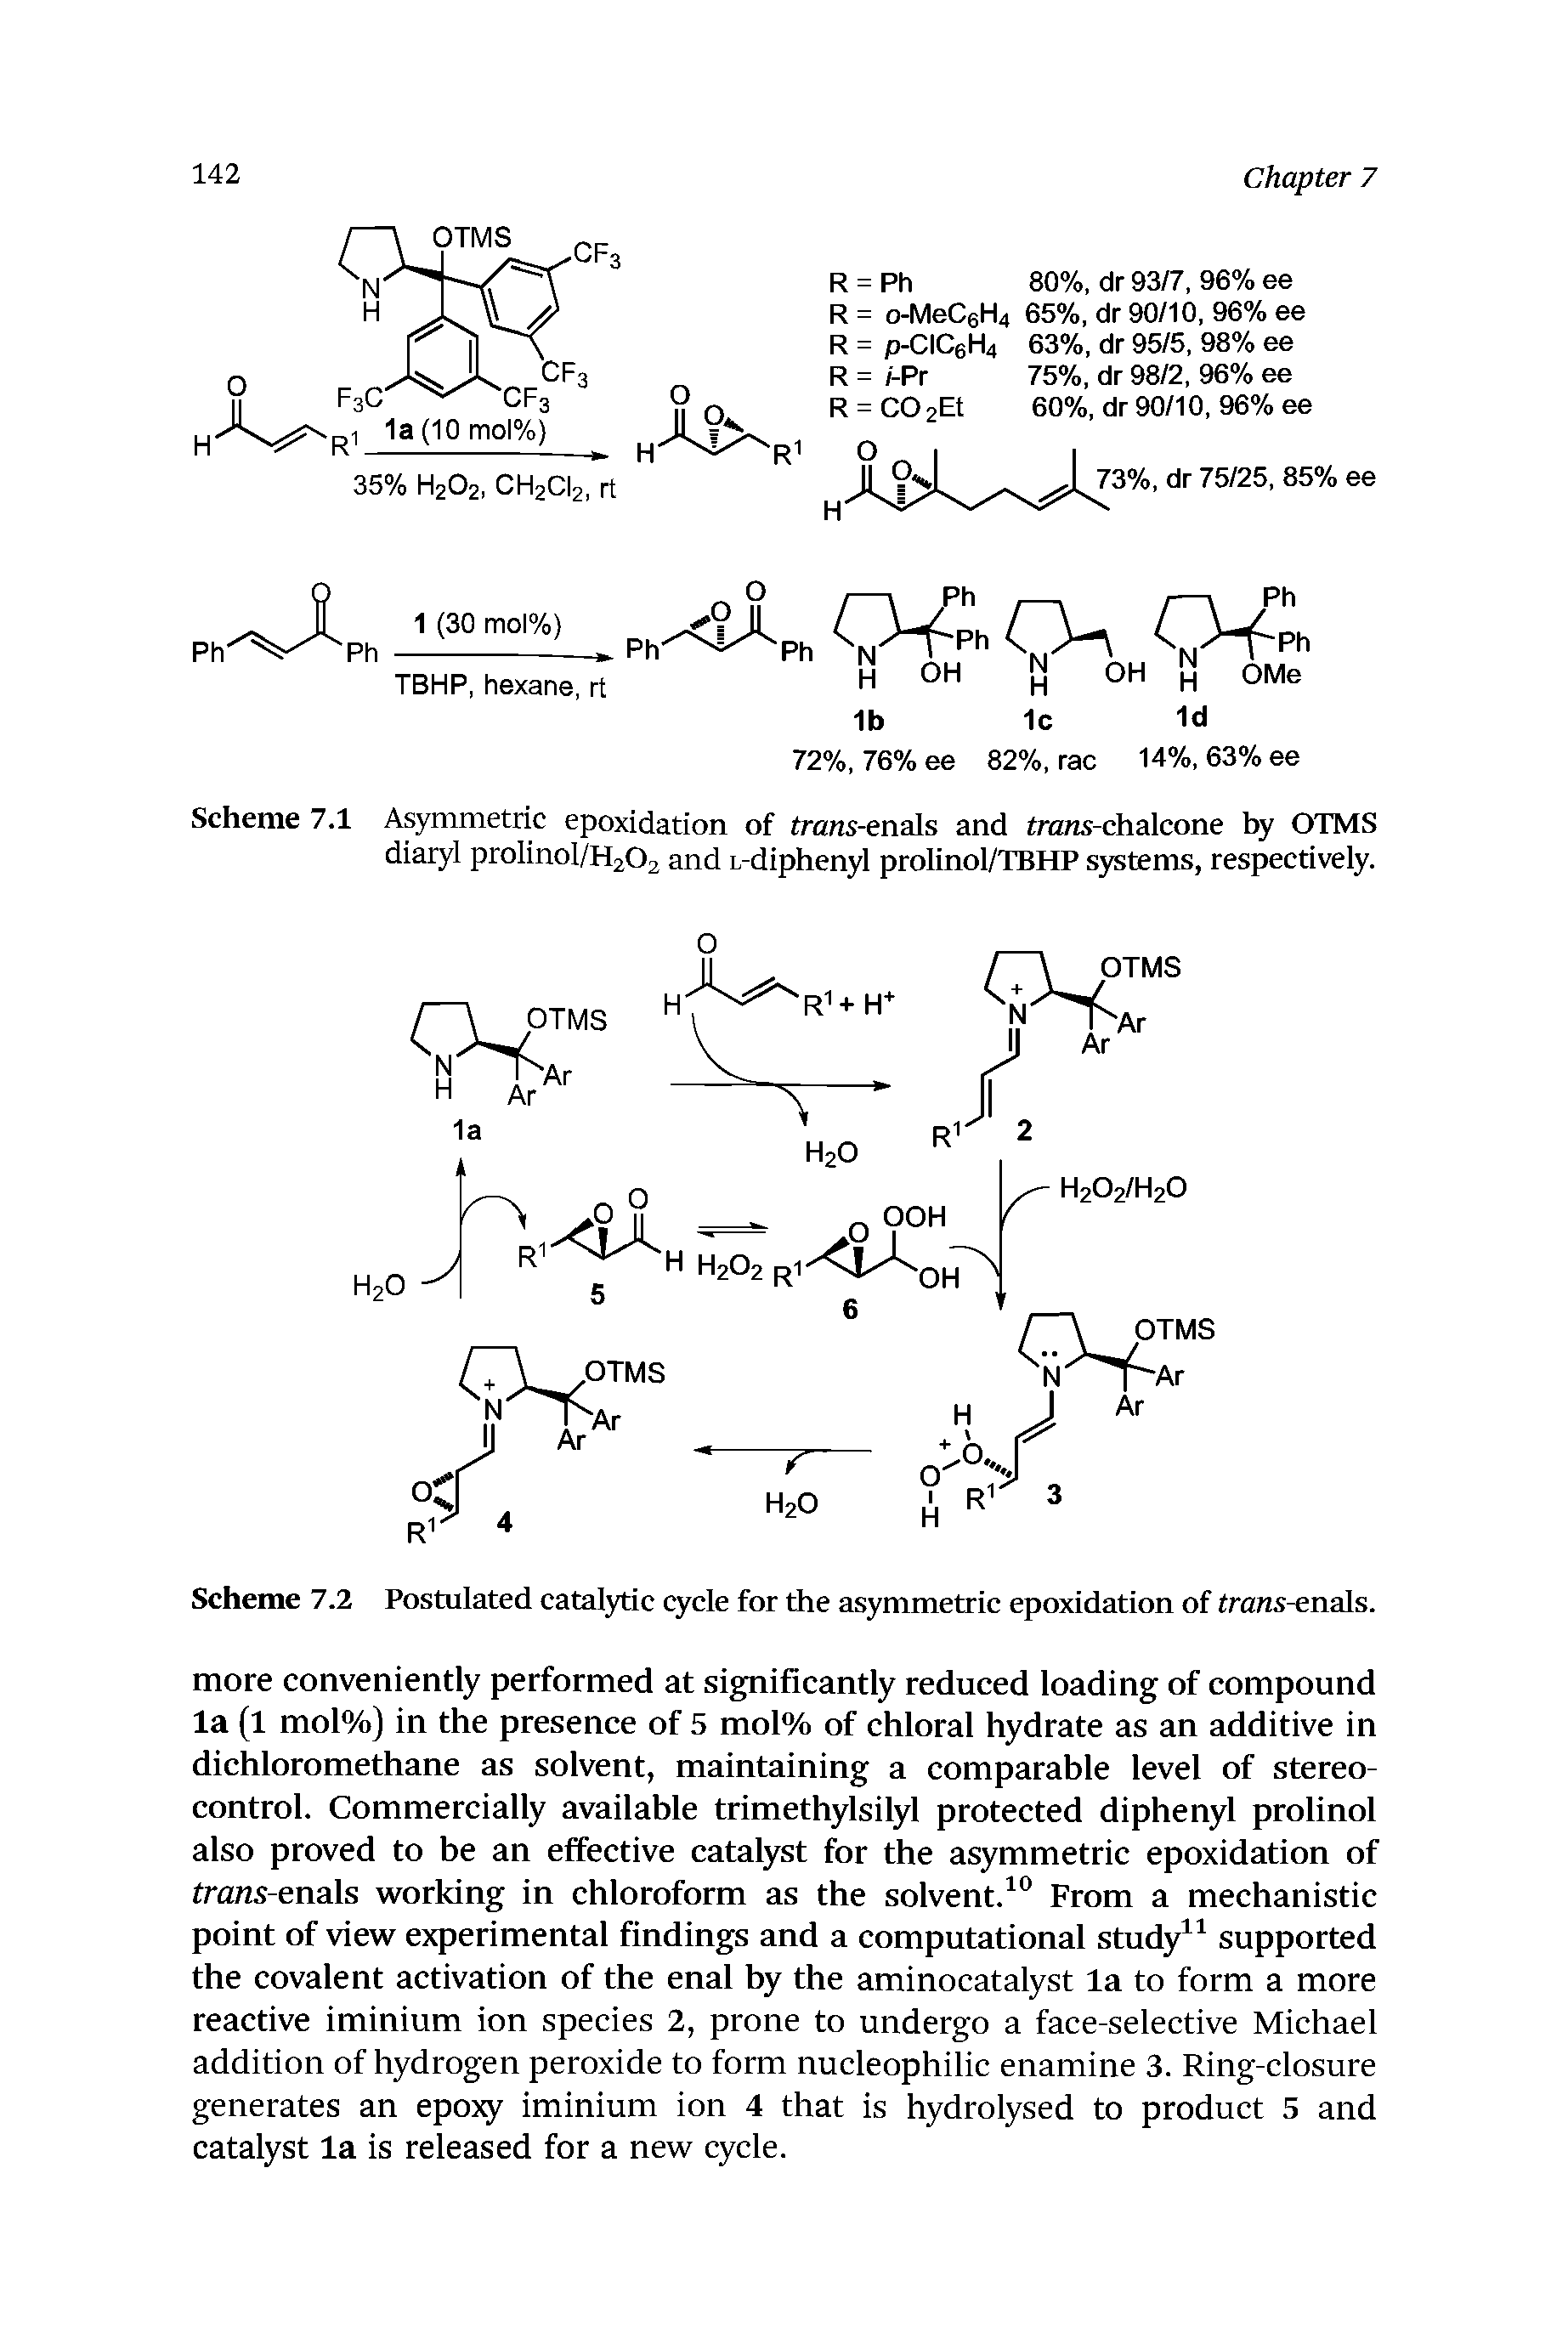 Scheme 7.1 Asymmetric epoxidation of tra/rs-enals and frans-chalcone by OTMS diaryl prolinol/H202 and r-diphenyl prolinol/TBHP s tems, respectively.